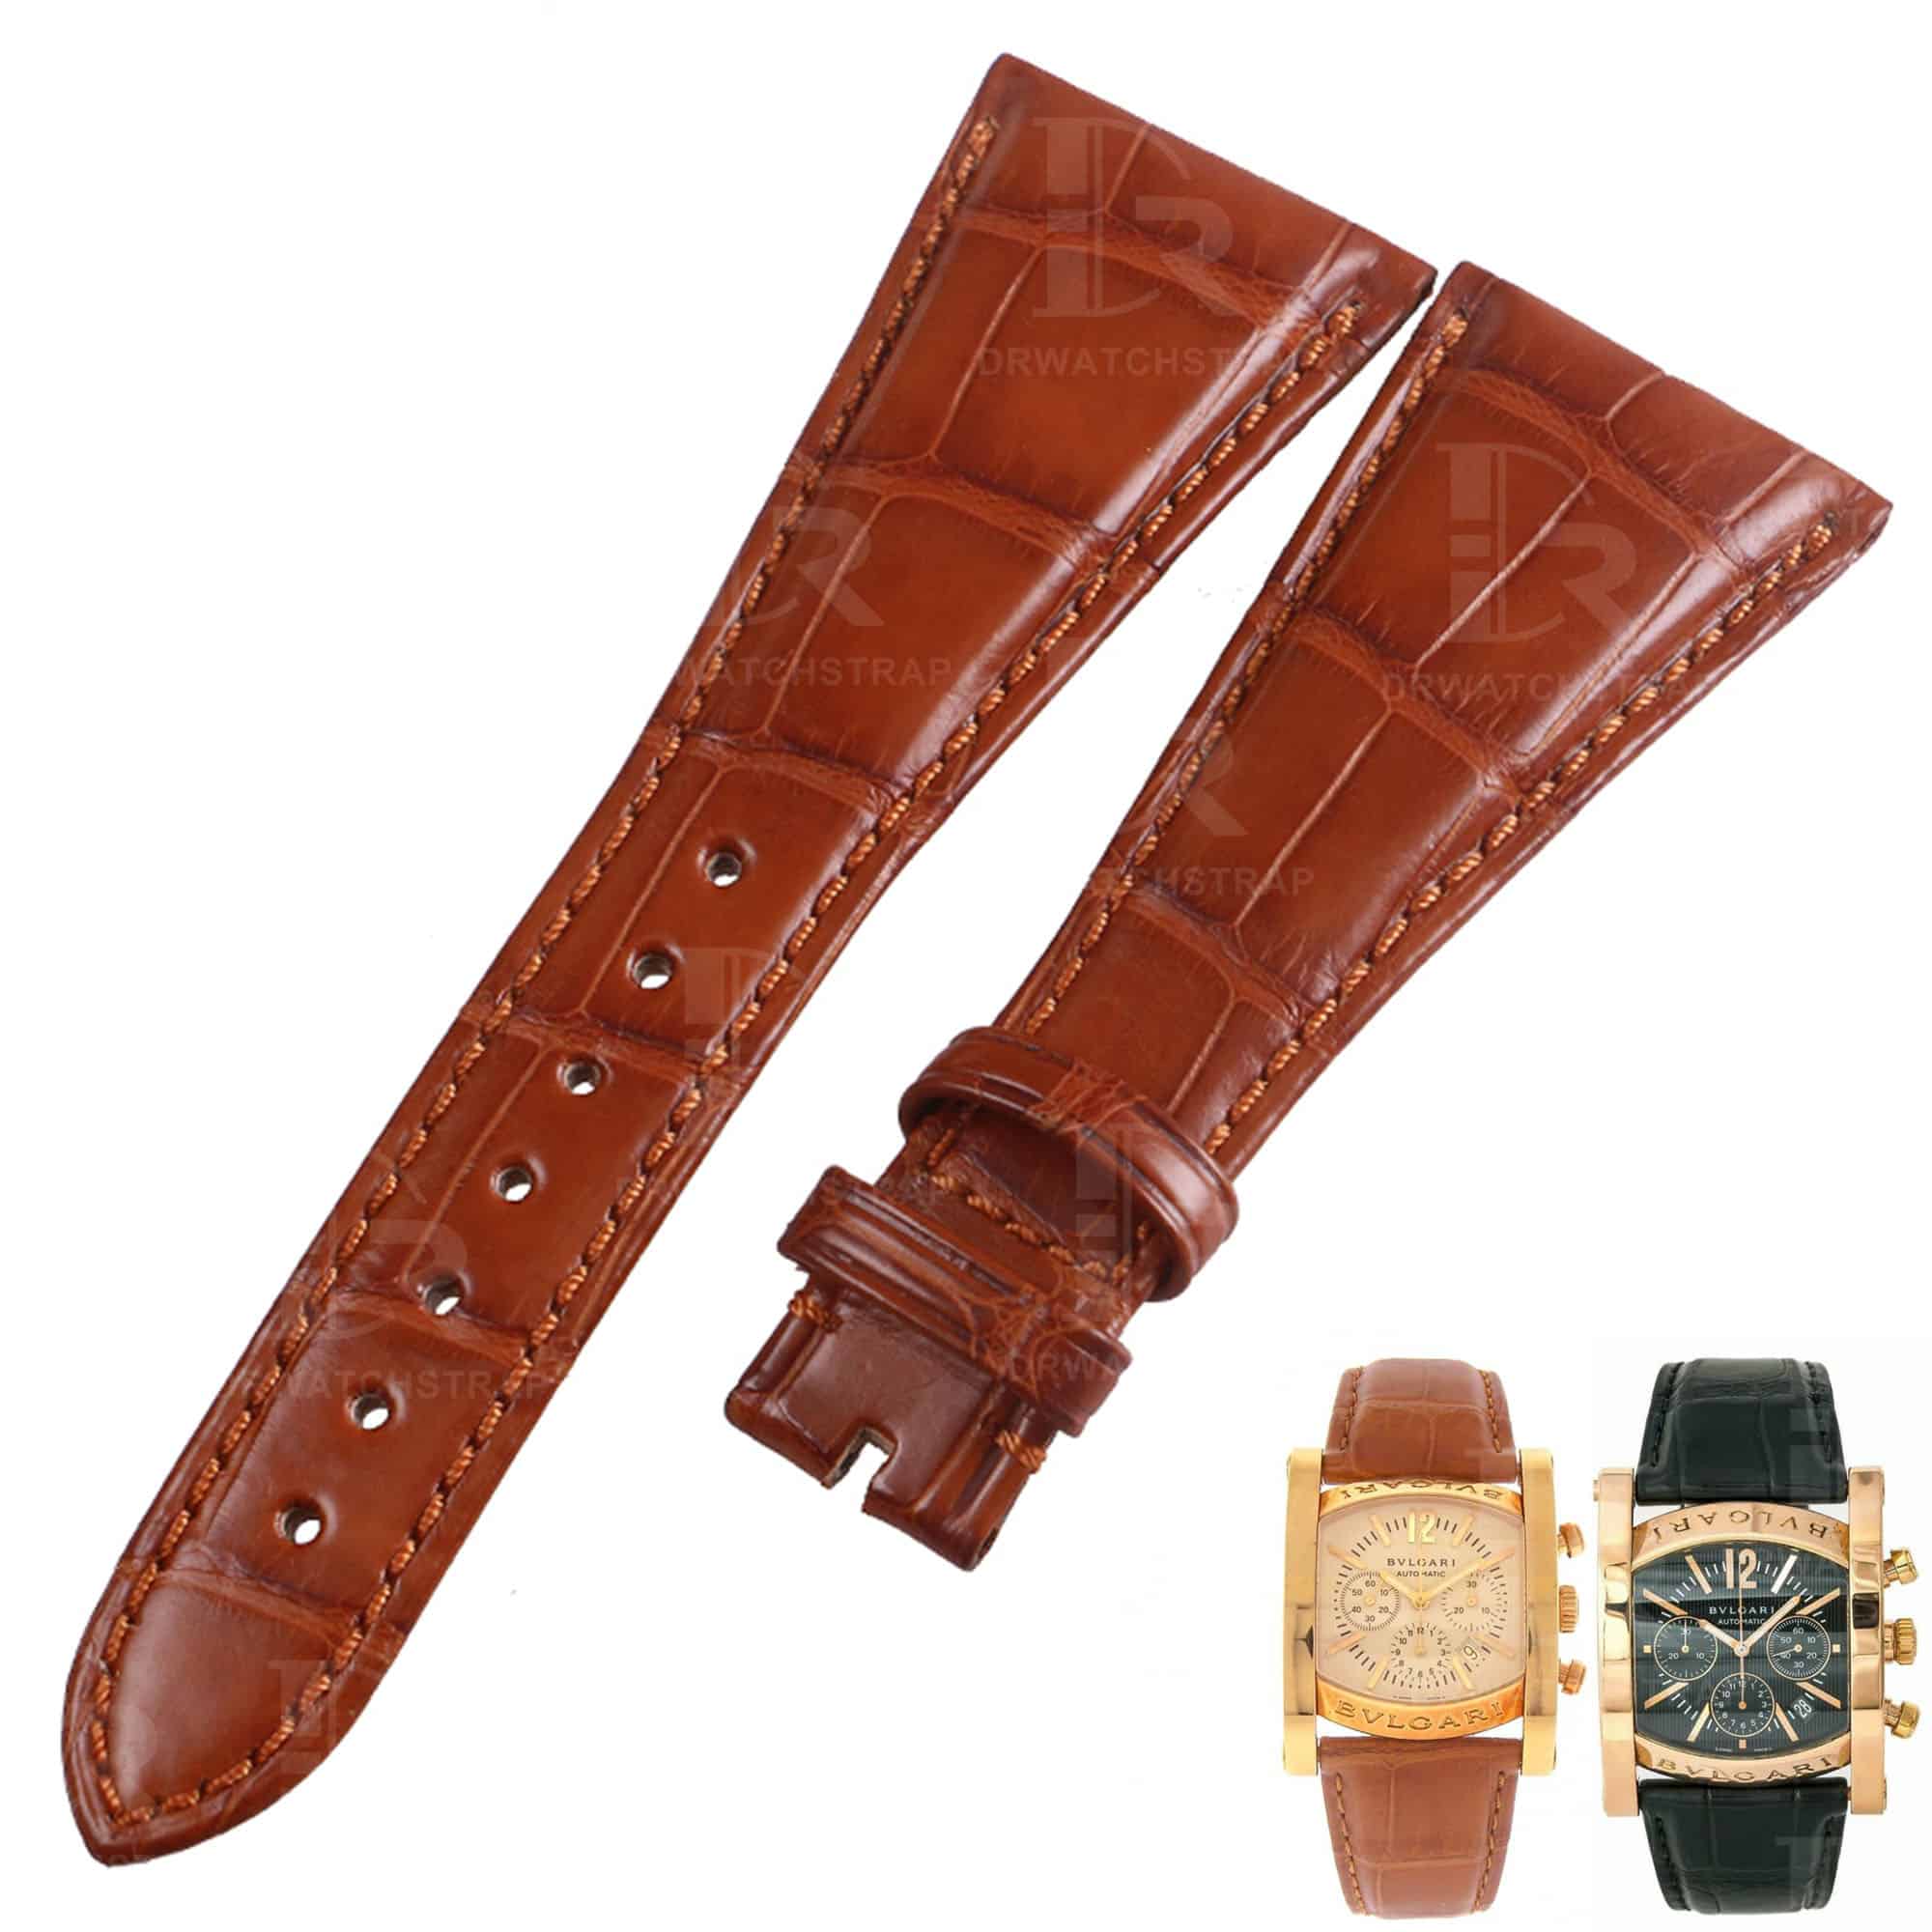 The best quality genuine OEM custom handmade American Alligator Crocodile replacement brown leather watch band and watch strap for Bvlgari Assioma luxury men's women's watches online - Shop the premium belly-scale straps and watchbands from Dr watchstrap at a low price